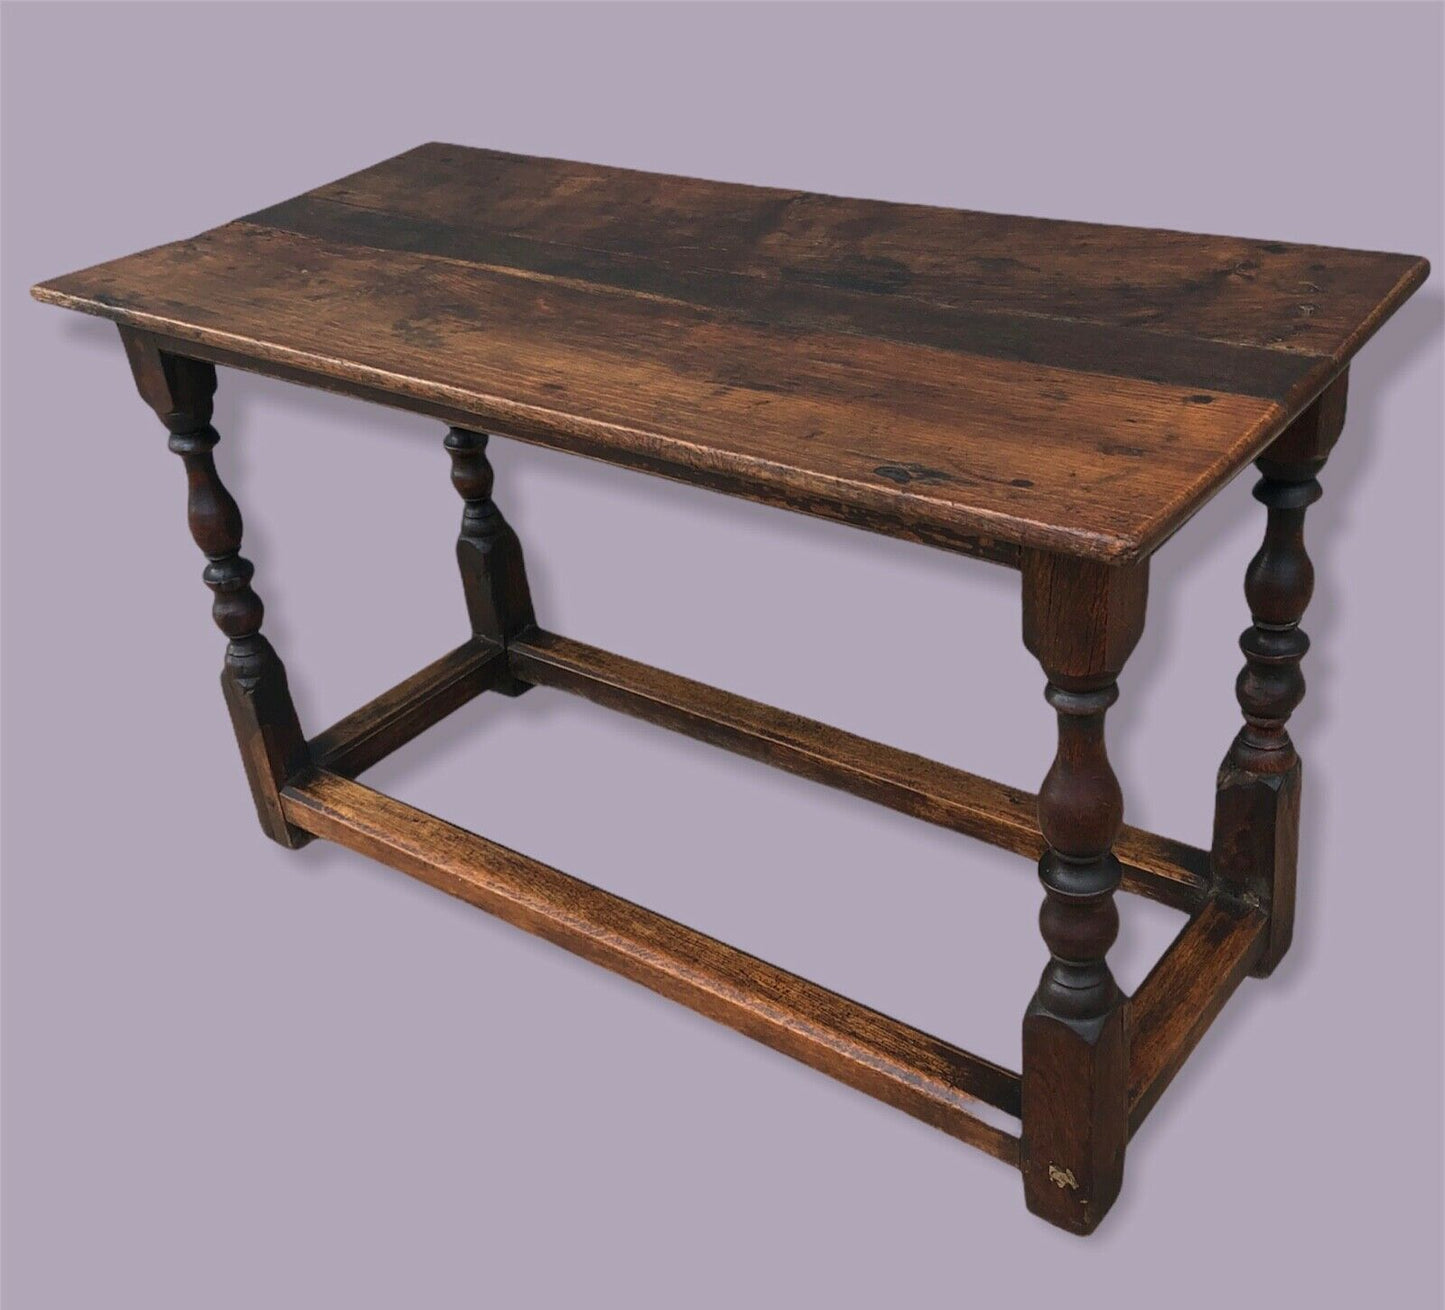 Handsome Solid Oak Coffee Table Made From Antique Oak ( SOLD )